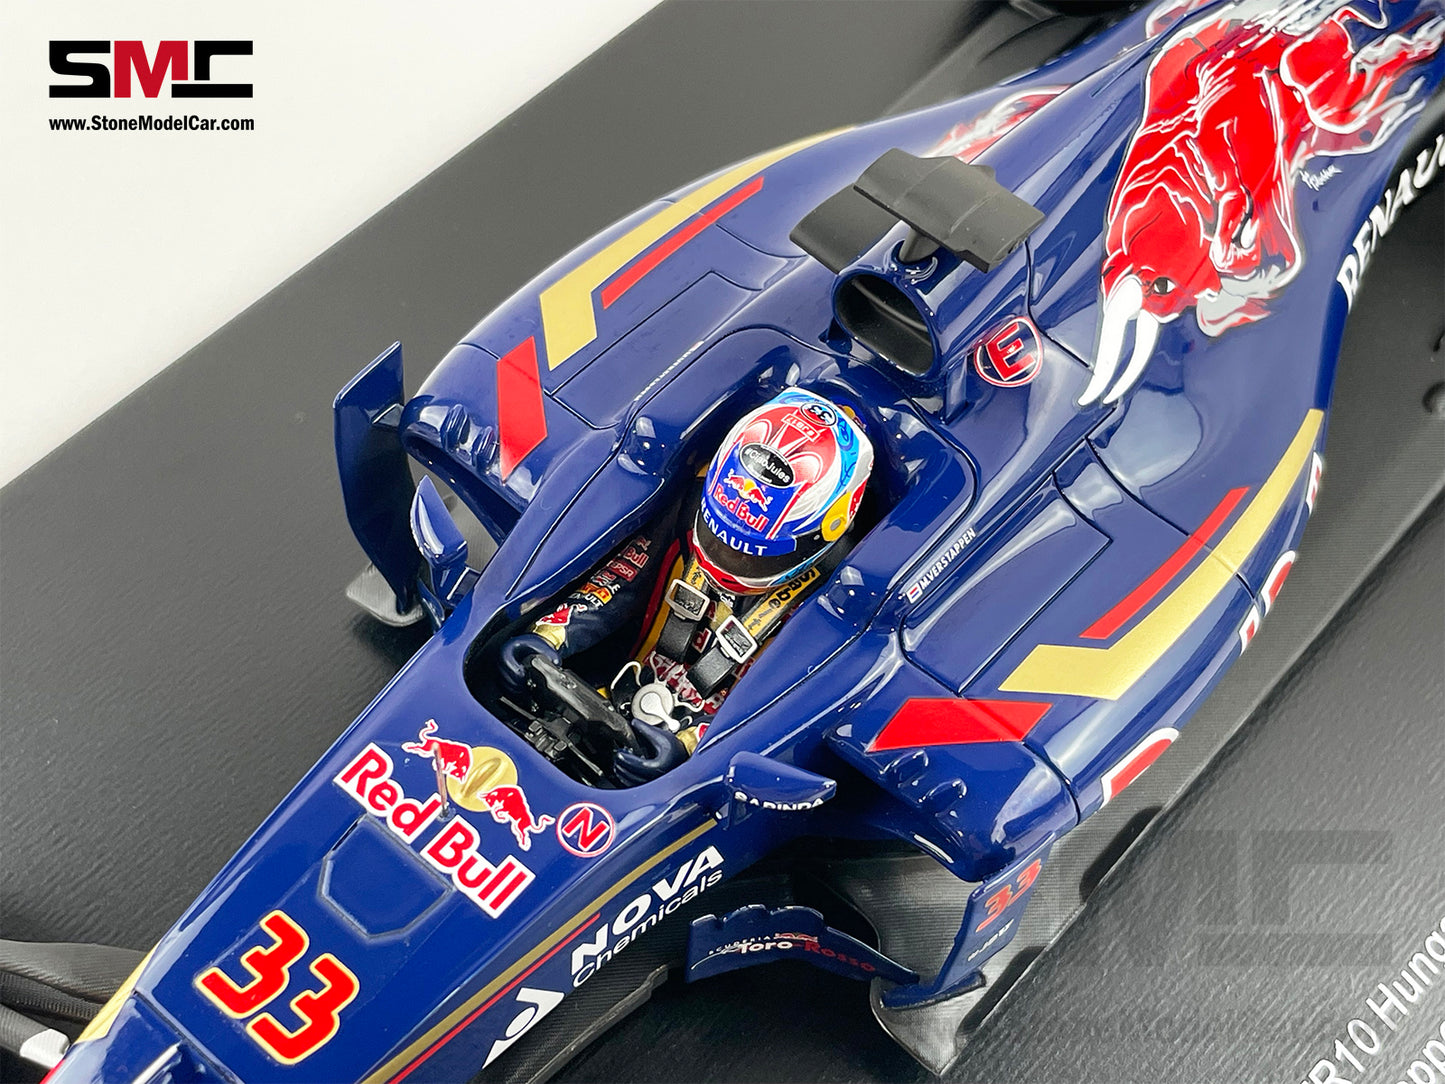 1:18 Spark Toro Rosso F1 STR10 #33 Max Verstappen Hungary GP Best Place in 2015